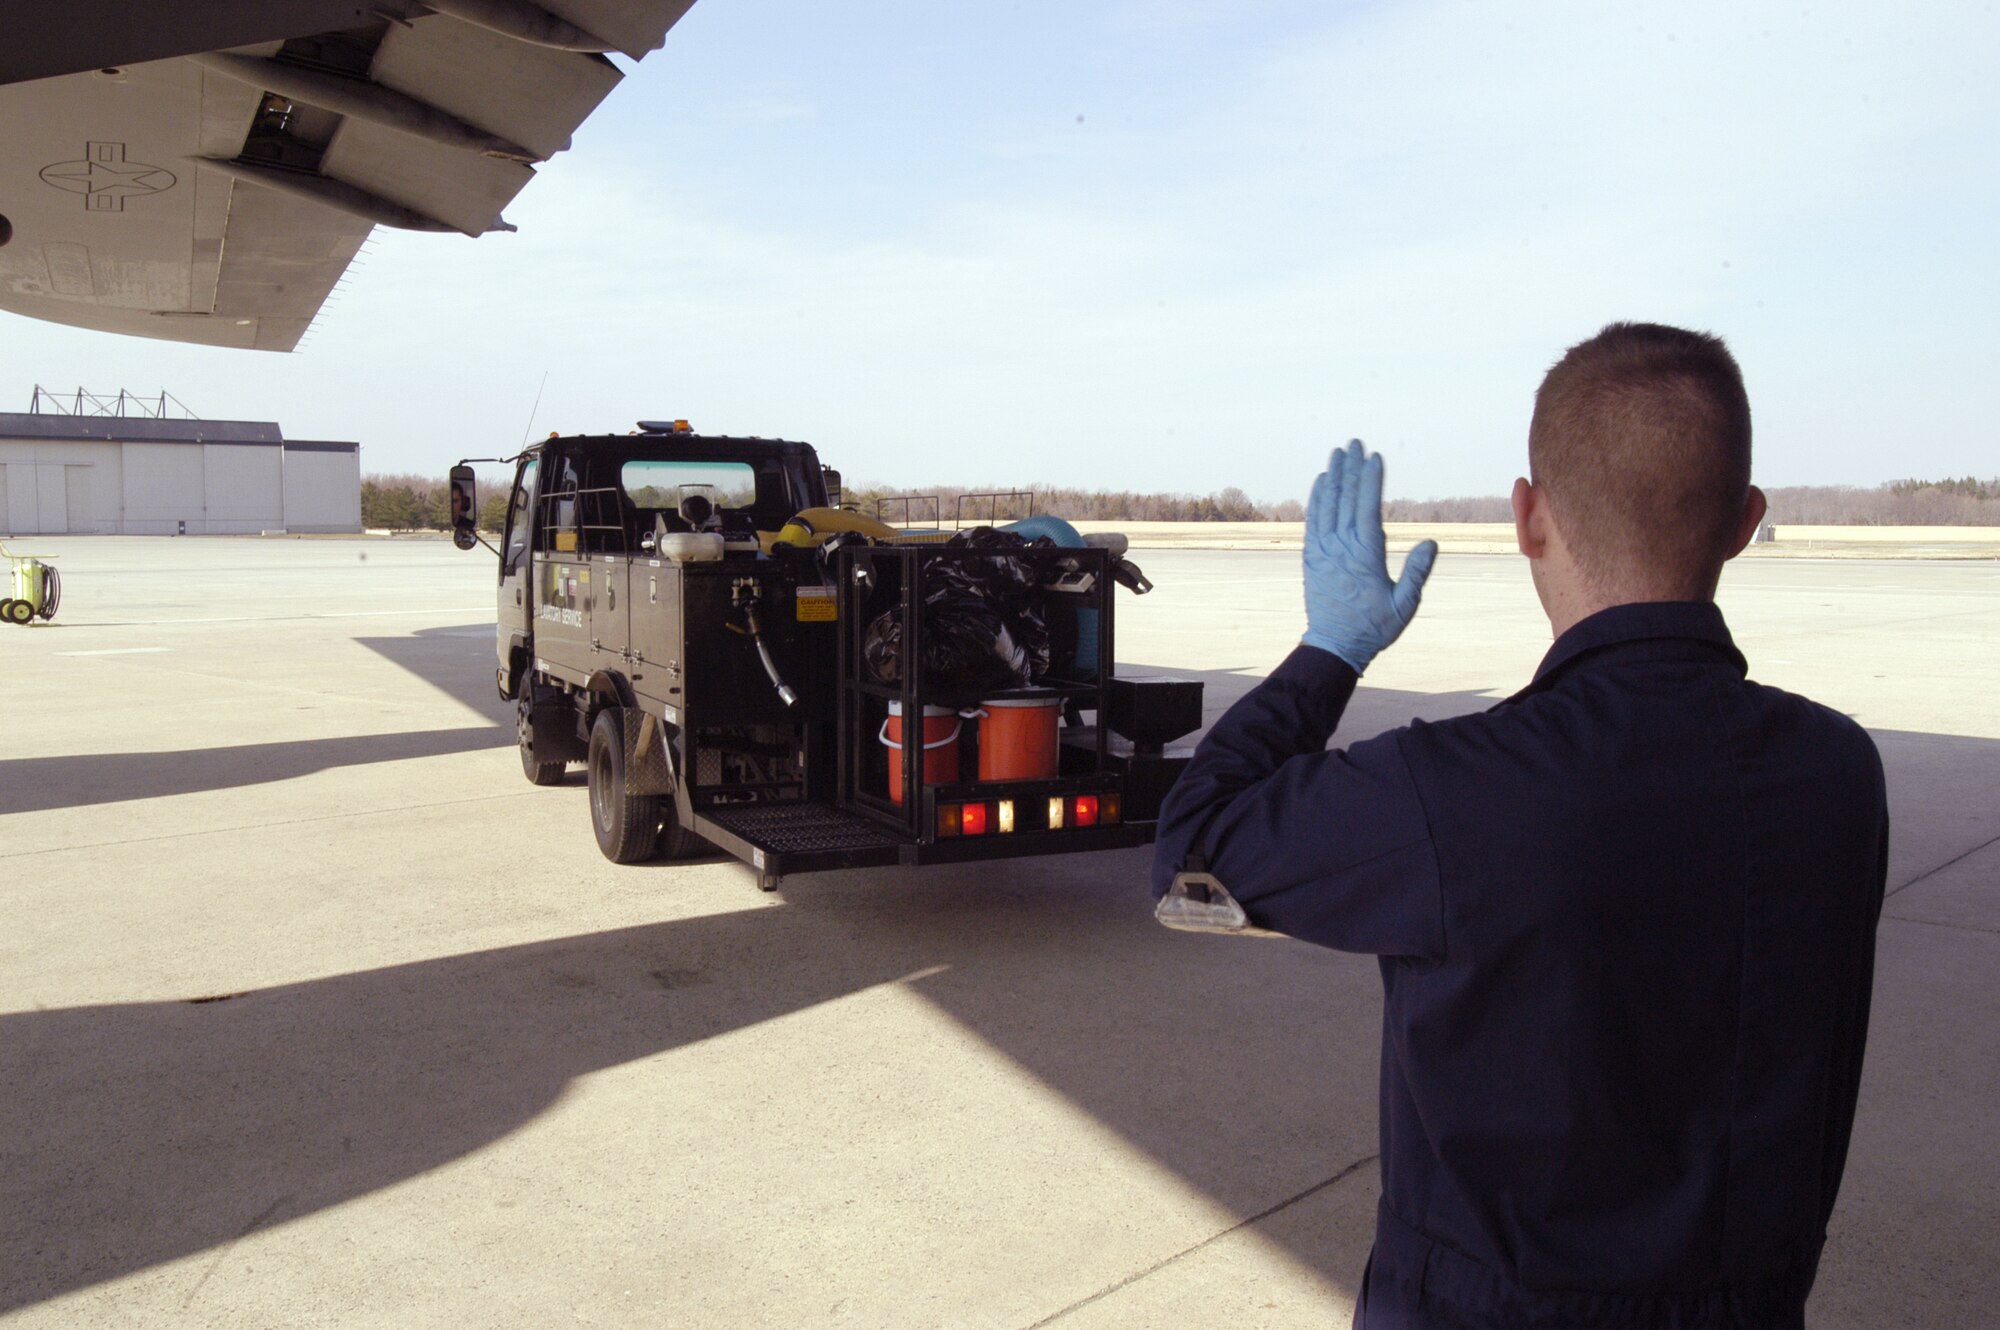 DOVER AIR FORCE BASE, Del. -- Airman 1st Class Douglas Kellogg carefully guides one of 436th Aerial Port Squadron Fleet Services Flight's Latrine Servicing Trucks, driven by Airman 1st Class Alex Hoover, safely toward a C-5 here.  The flight not only cleans and services all aircraft lavatories, but also removes trash on board, prepares all outbound aircraft with pillows, blankets and other necessary items, and delivers all passenger and crew meals. (U.S. Air Force photo/Senior Airman James Bolinger)                           